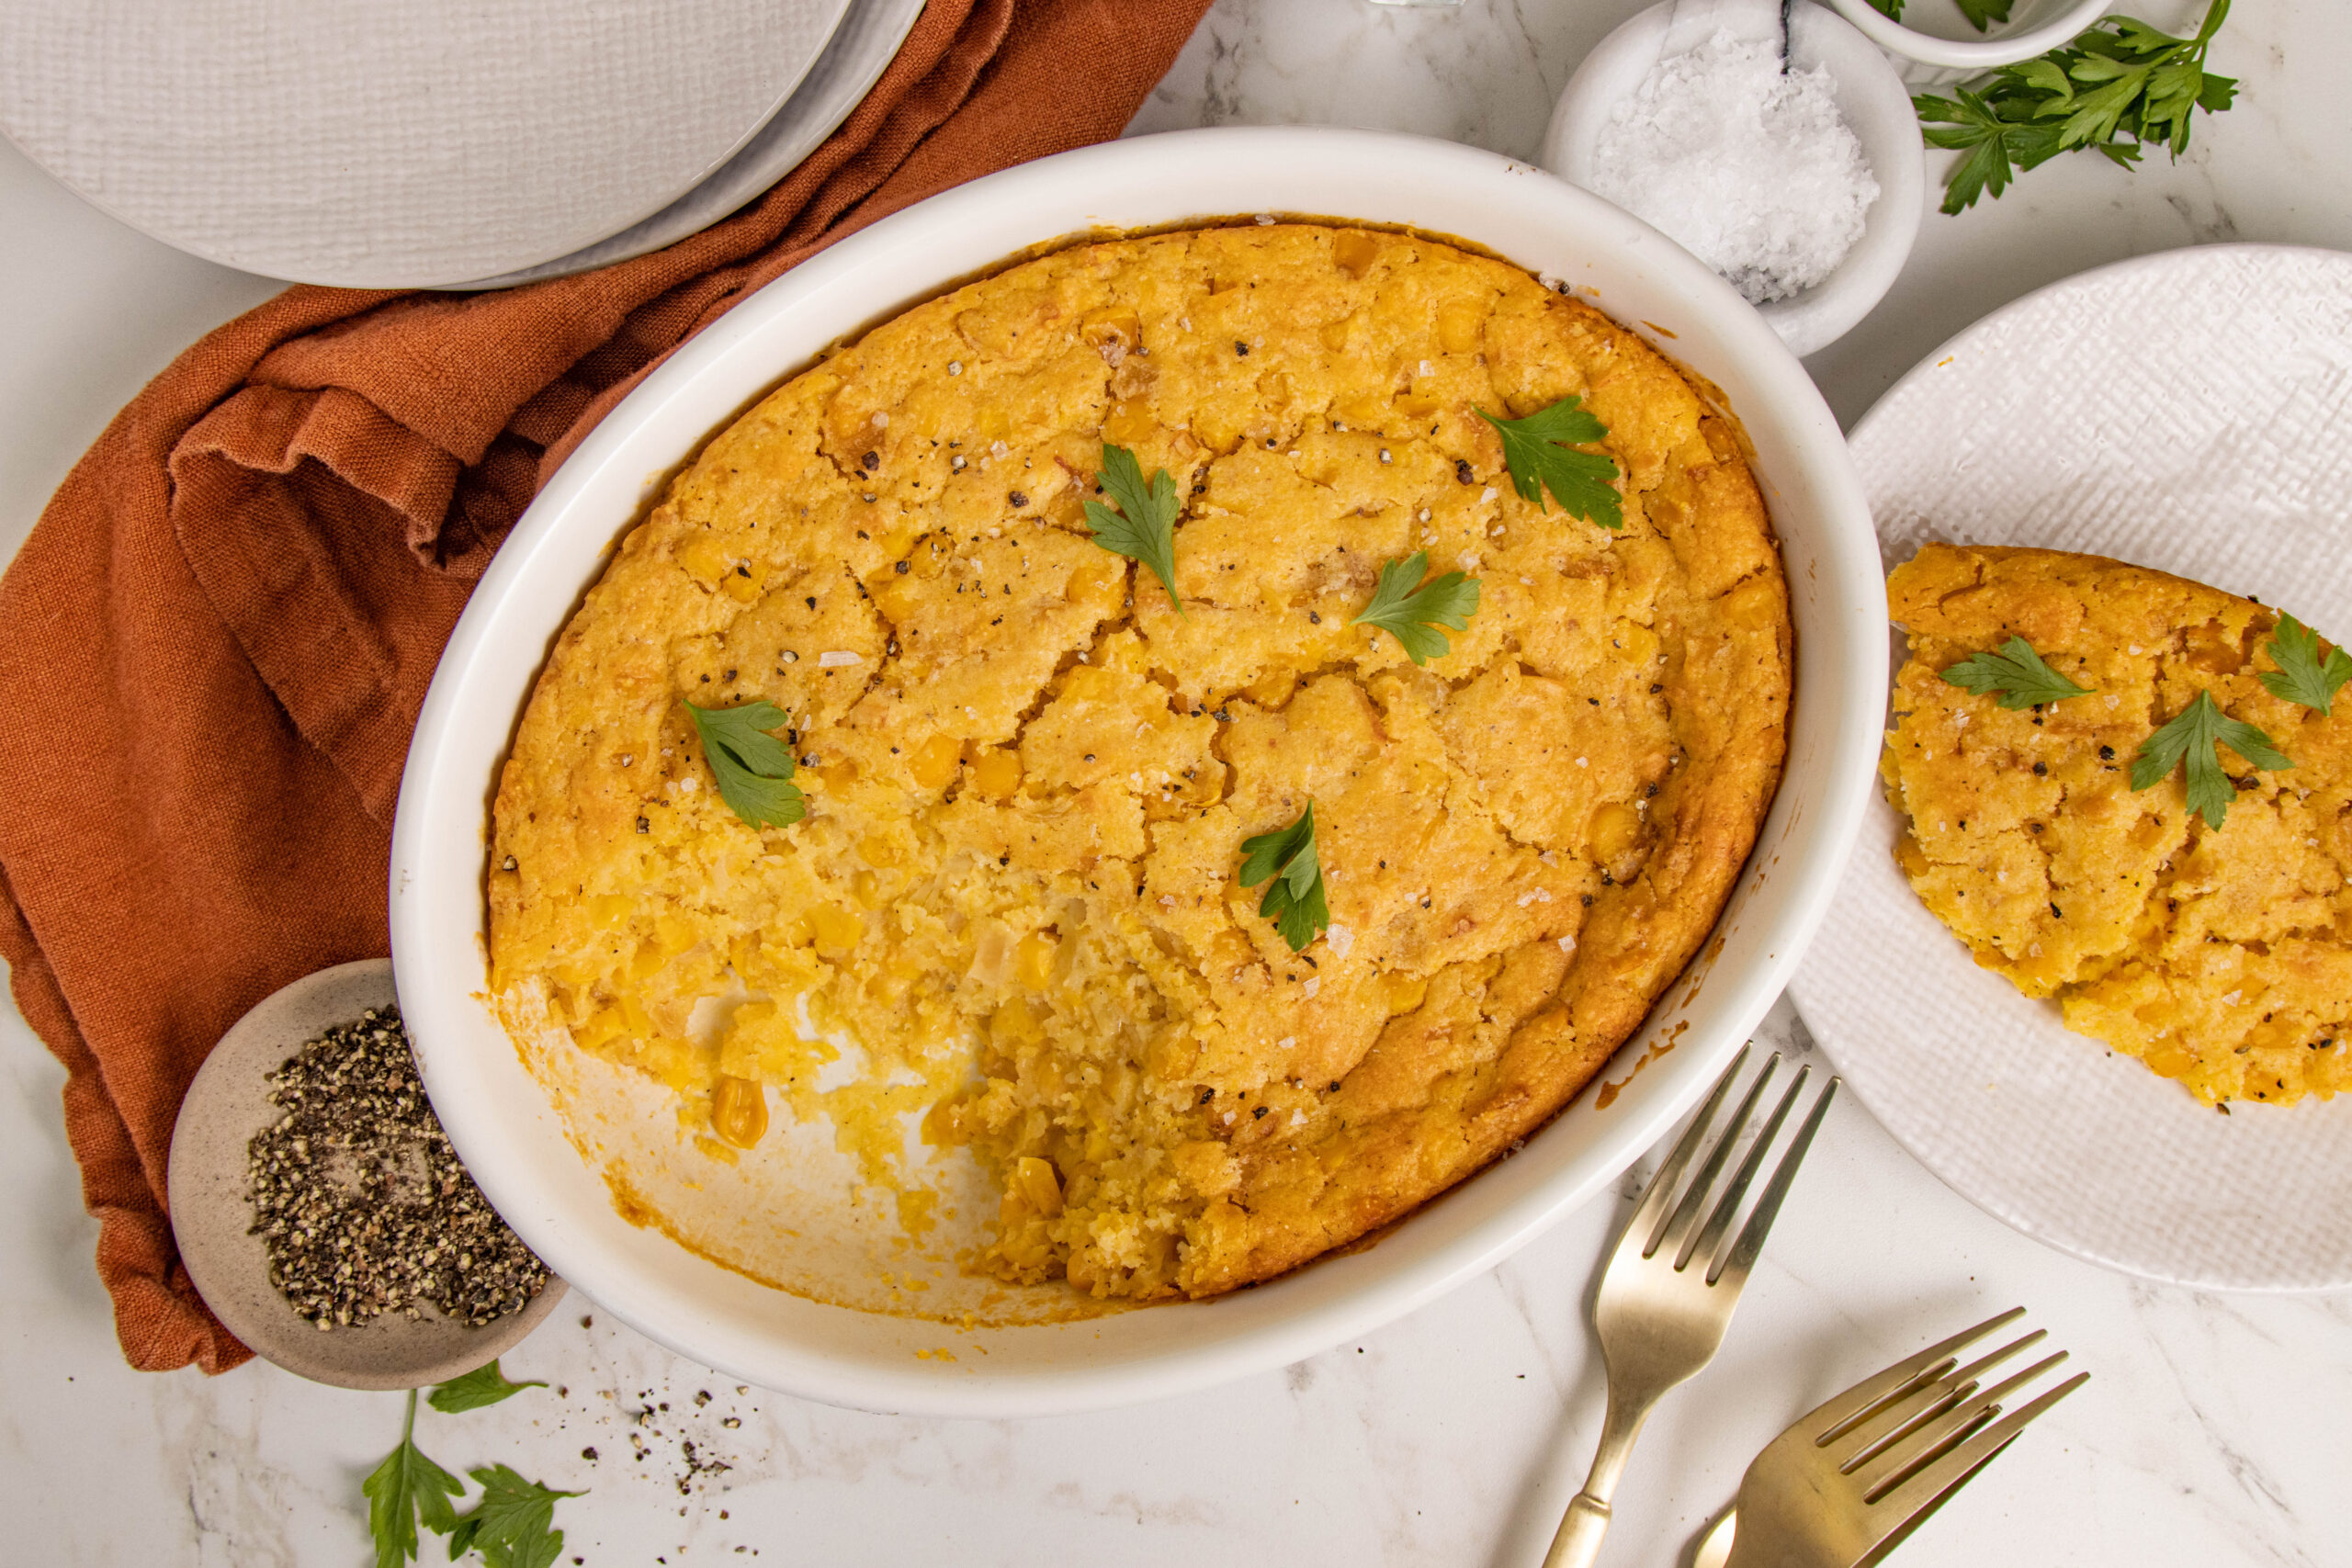 Best Thanksiving side dishes corn souffle